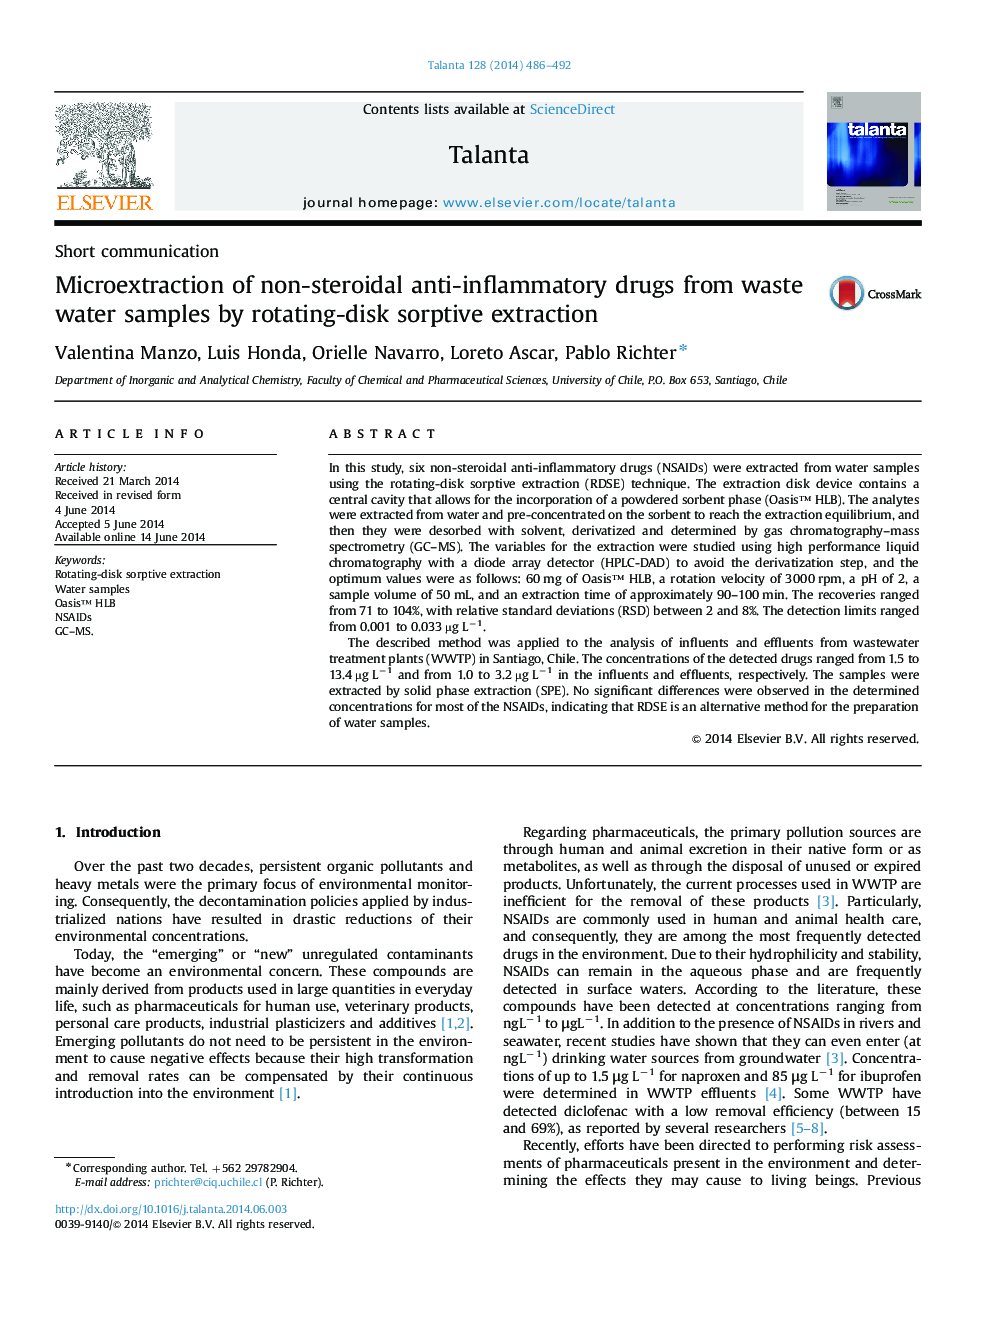 Microextraction of non-steroidal anti-inflammatory drugs from waste water samples by rotating-disk sorptive extraction